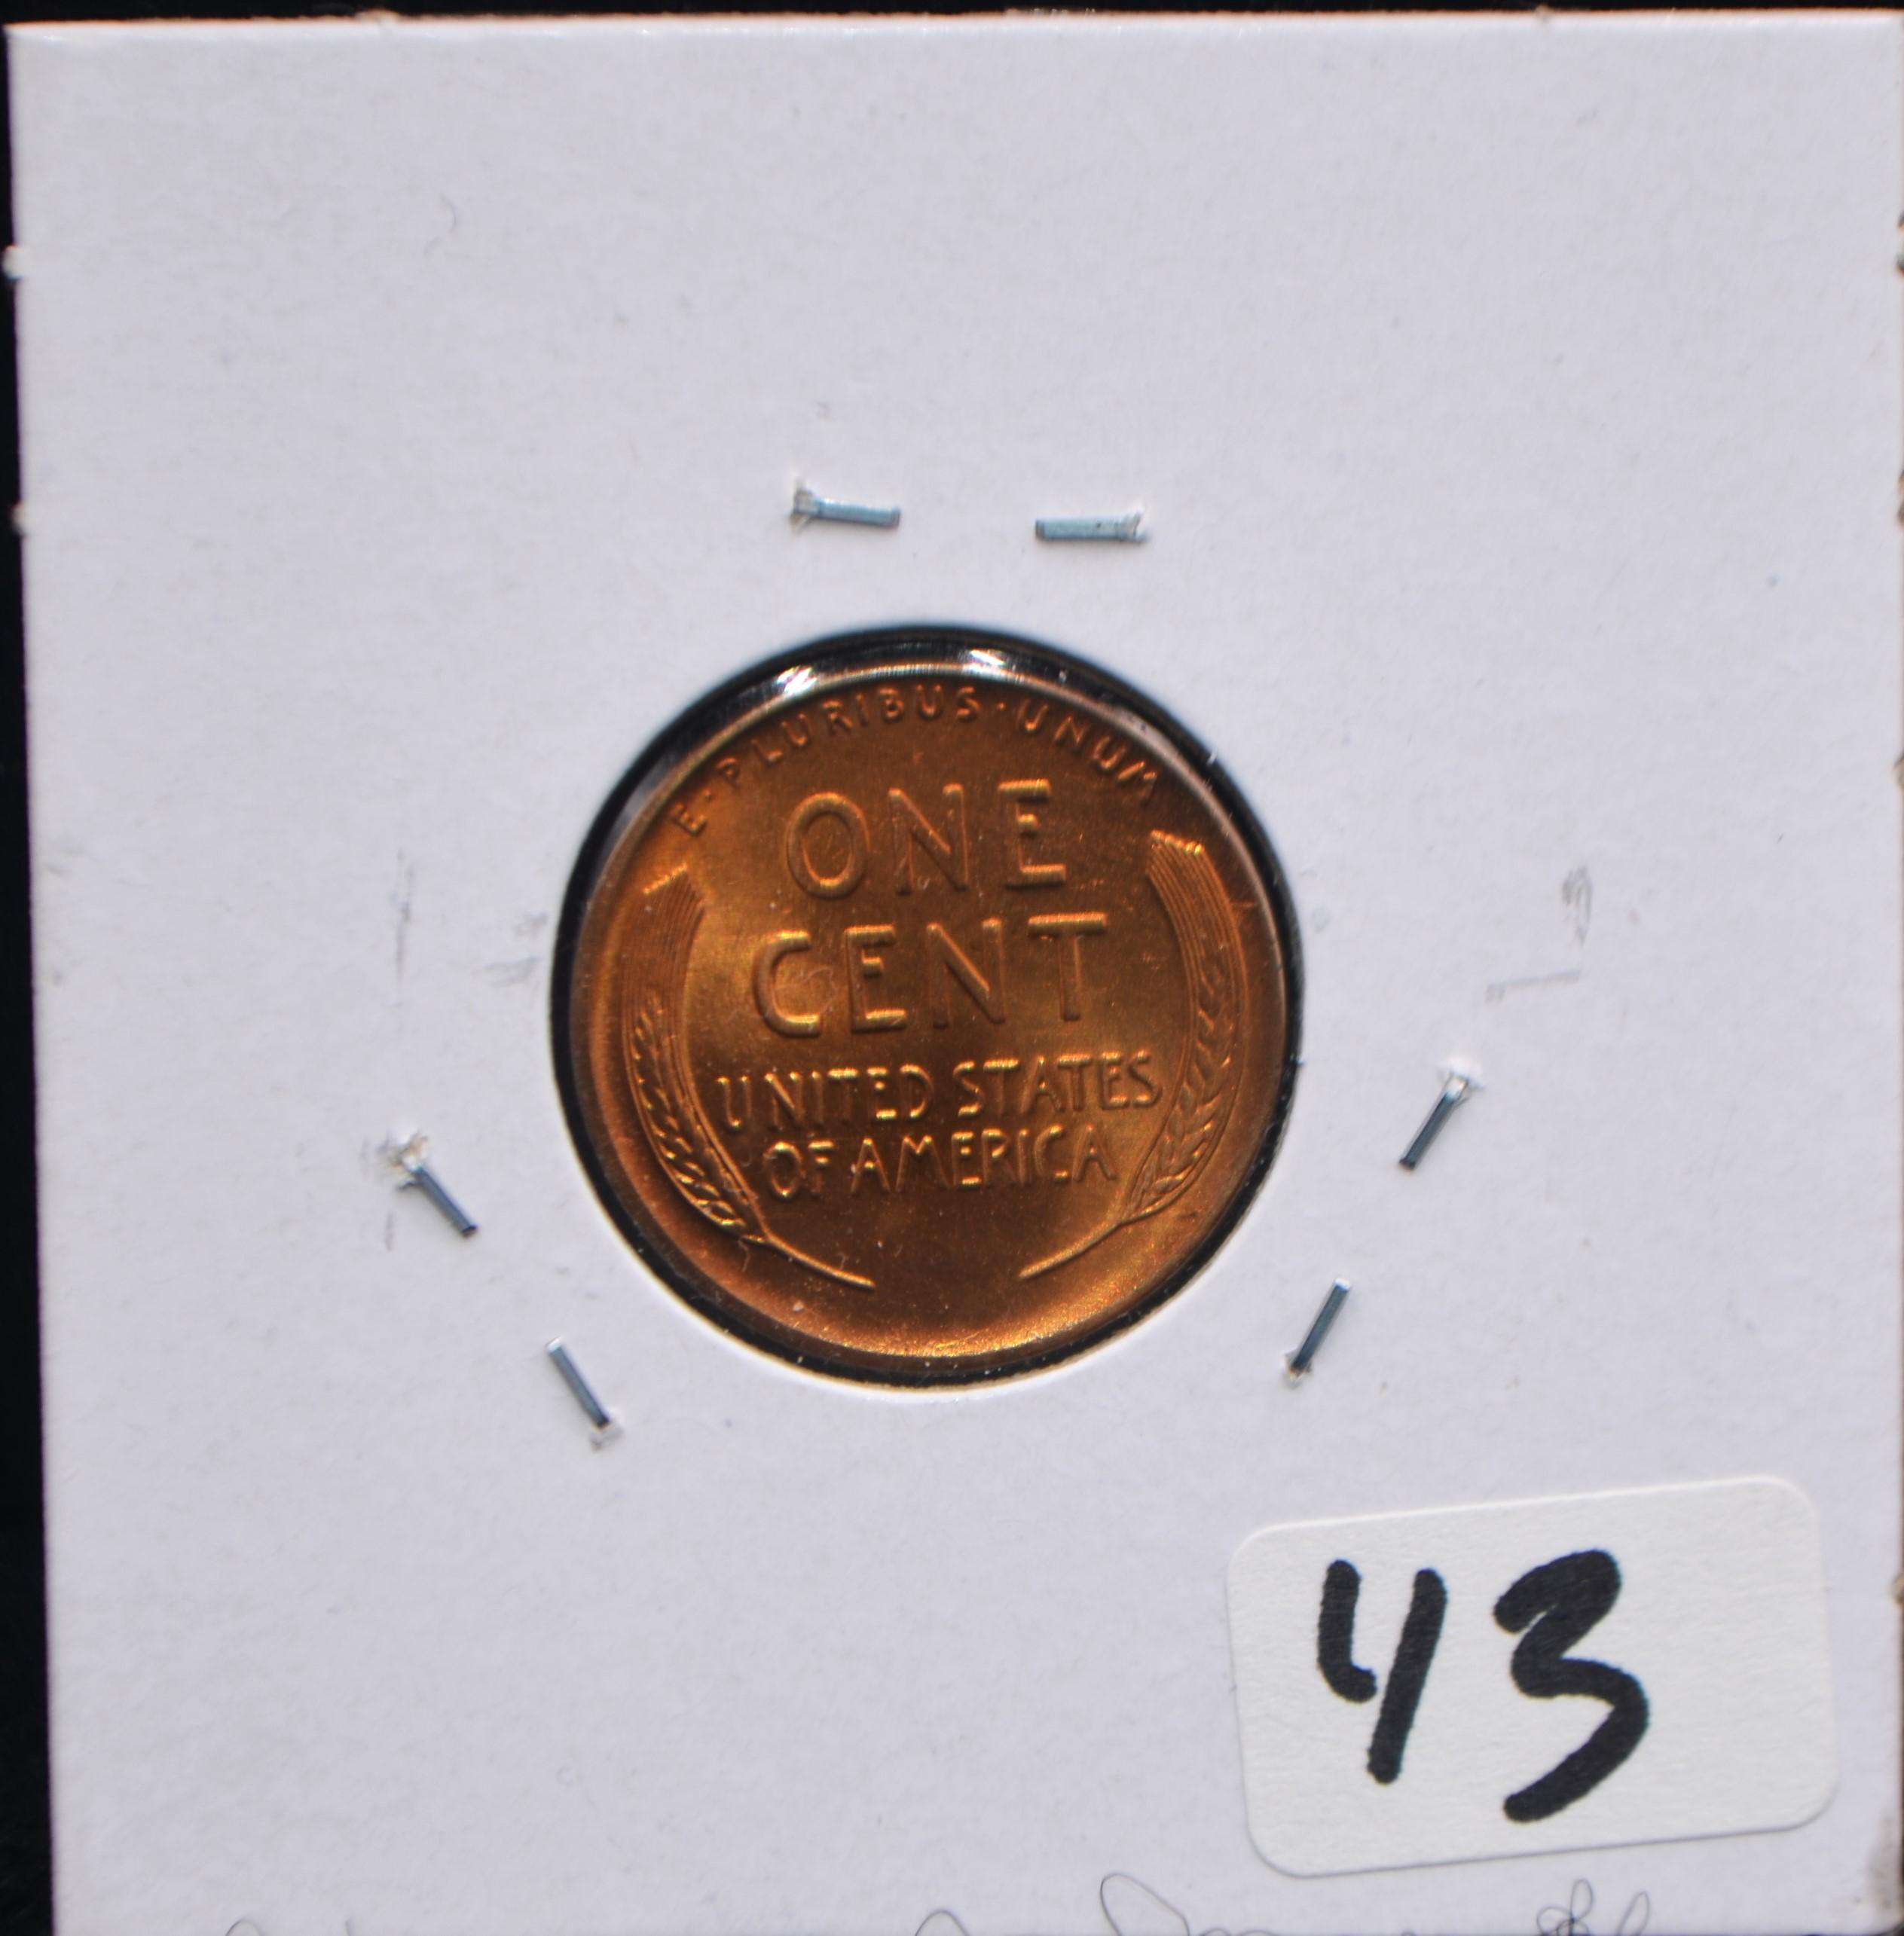 KEY DATE IN RED 1914-S LINCOLN WHEAT PENNY